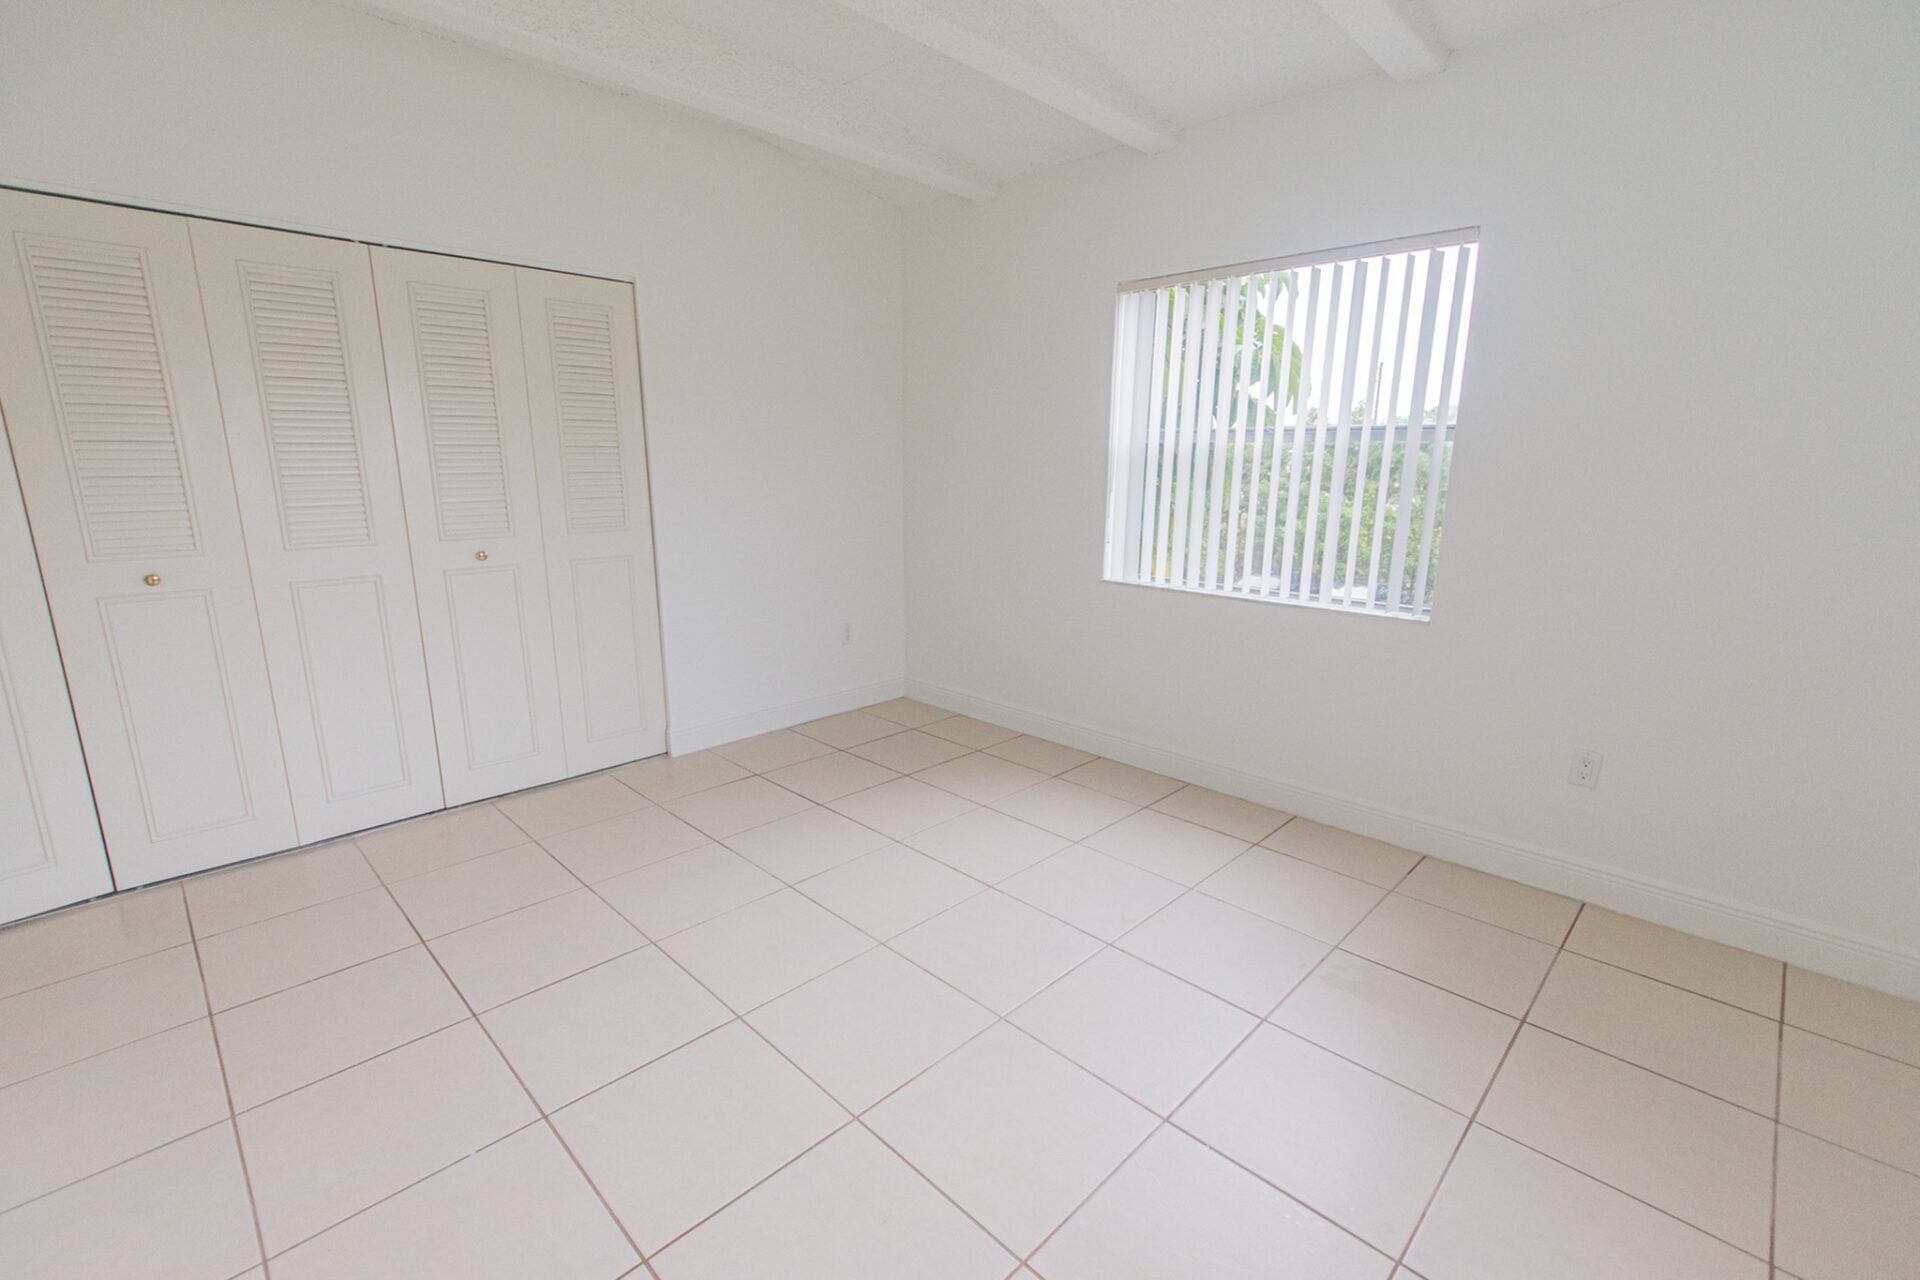 Spacious area in an apartment with a window and white tile flooring.